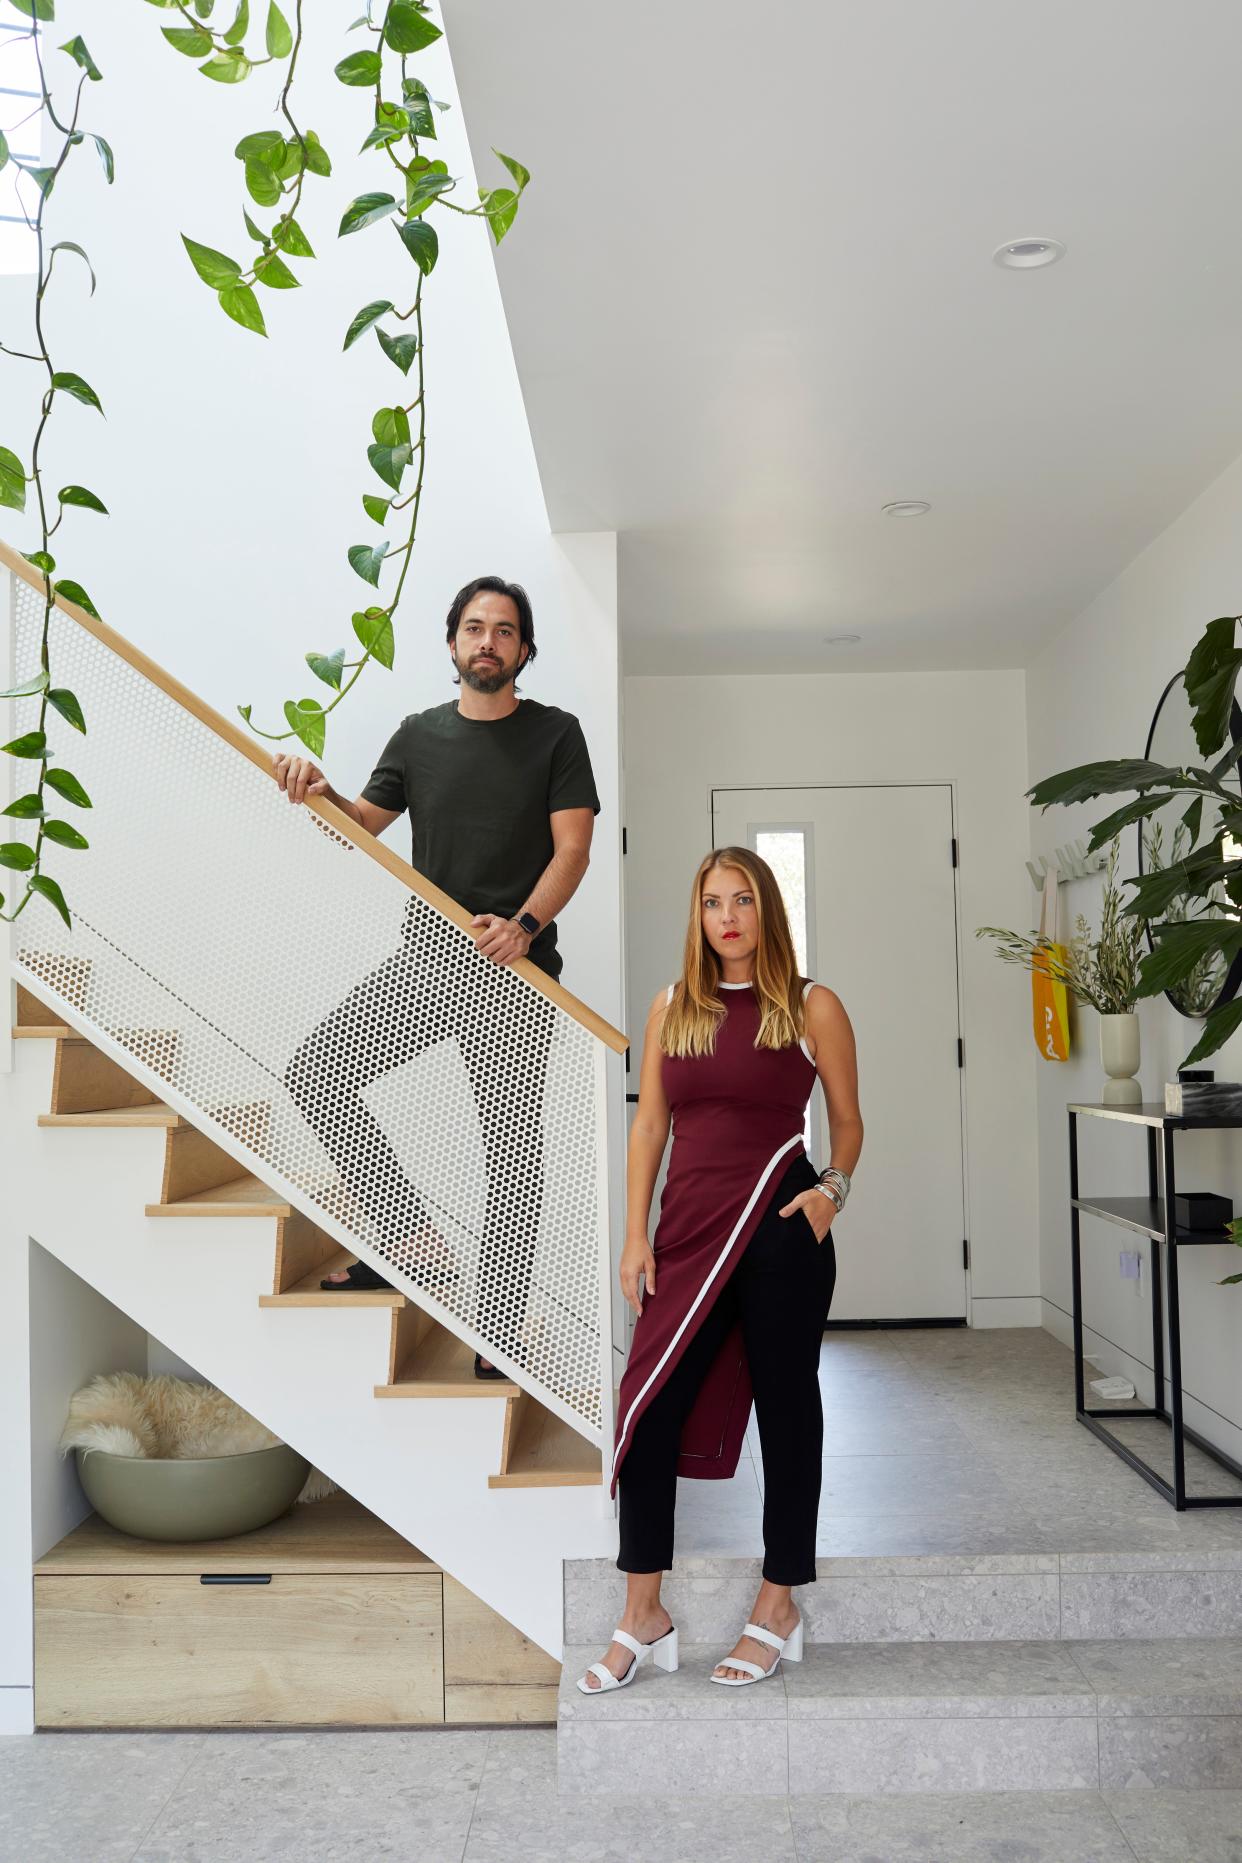 Todd Sussman (left) and Melanie Ryan in the Los Angeles home they designed themselves.